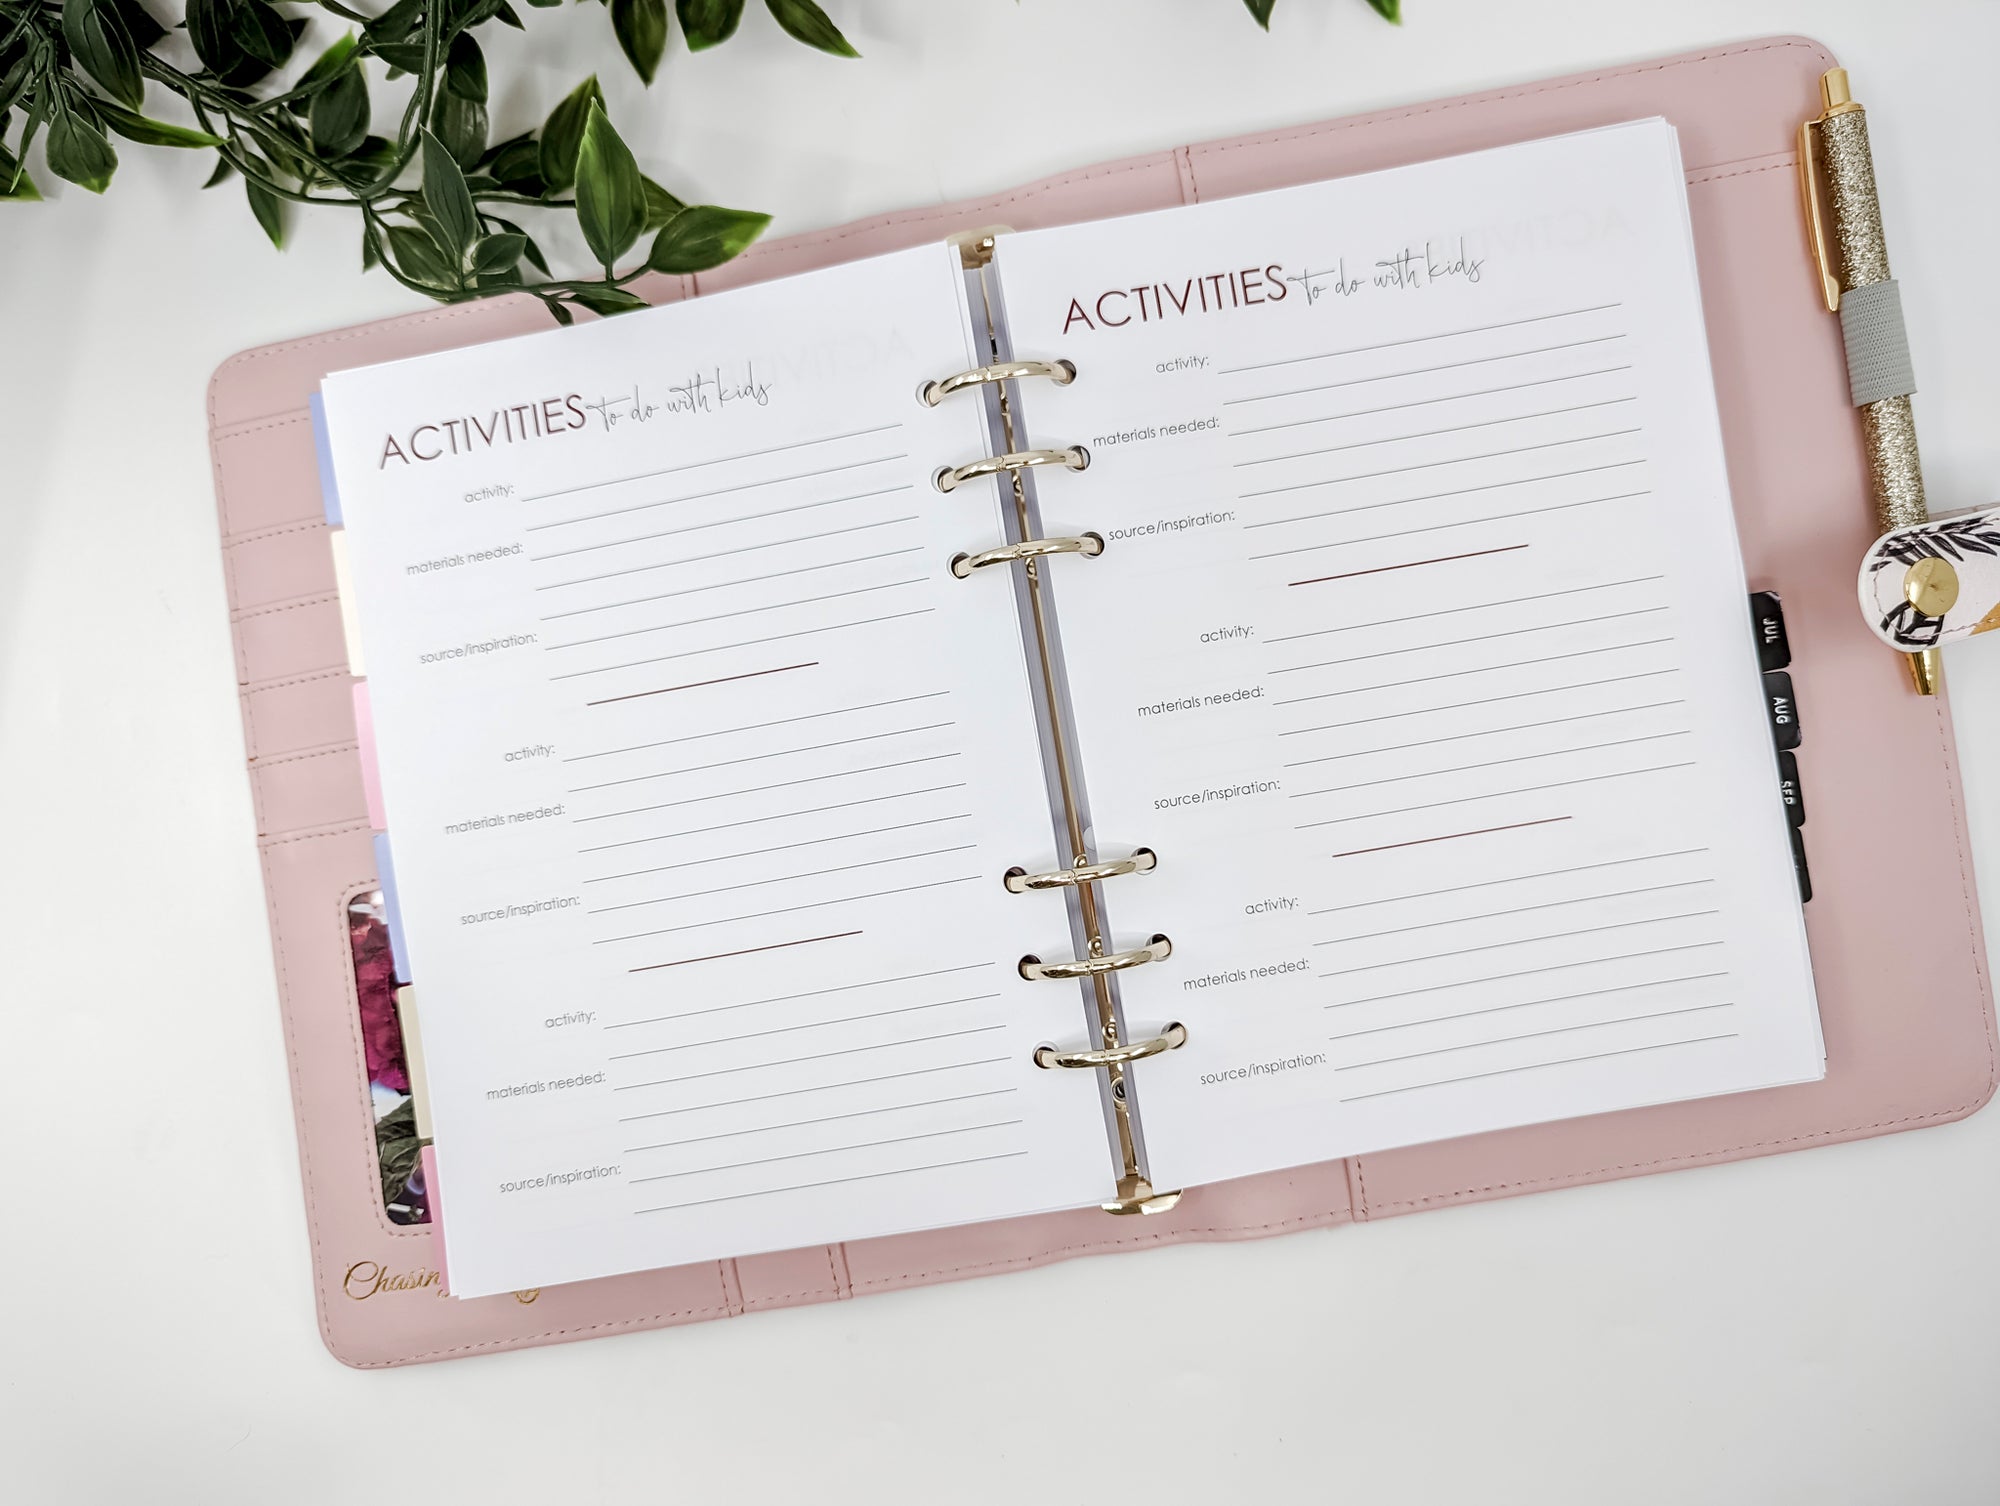 A5 activities to do with kids planner refill